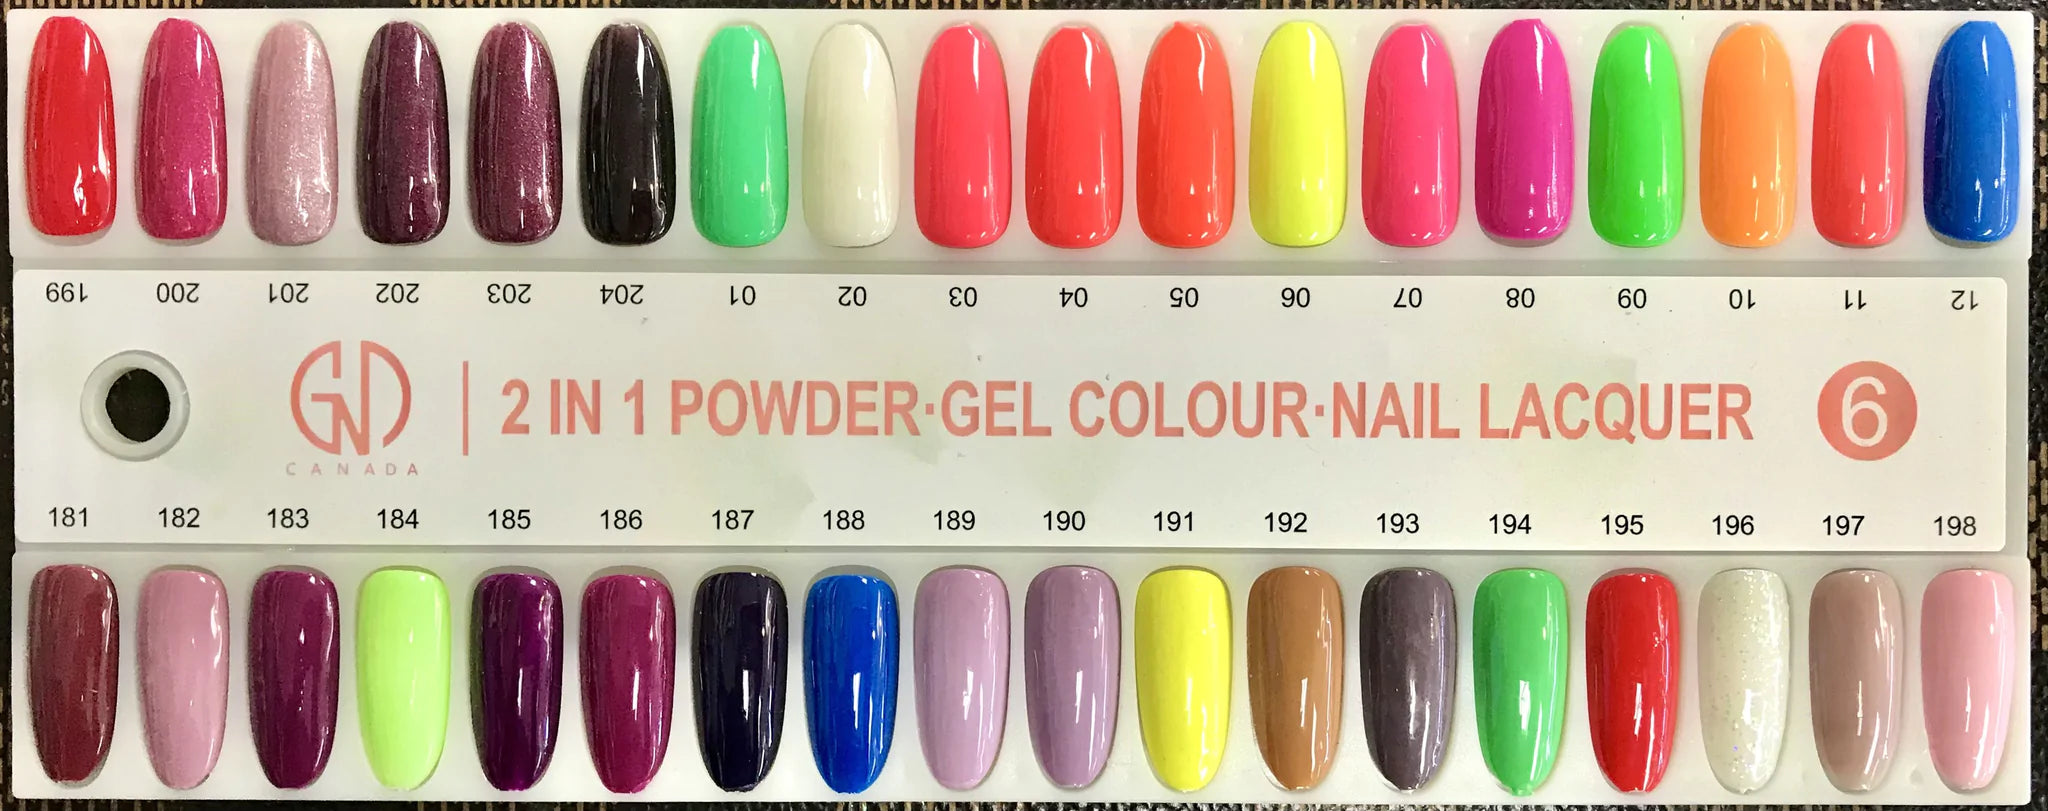 GND Duo Gel & Lacquer 196